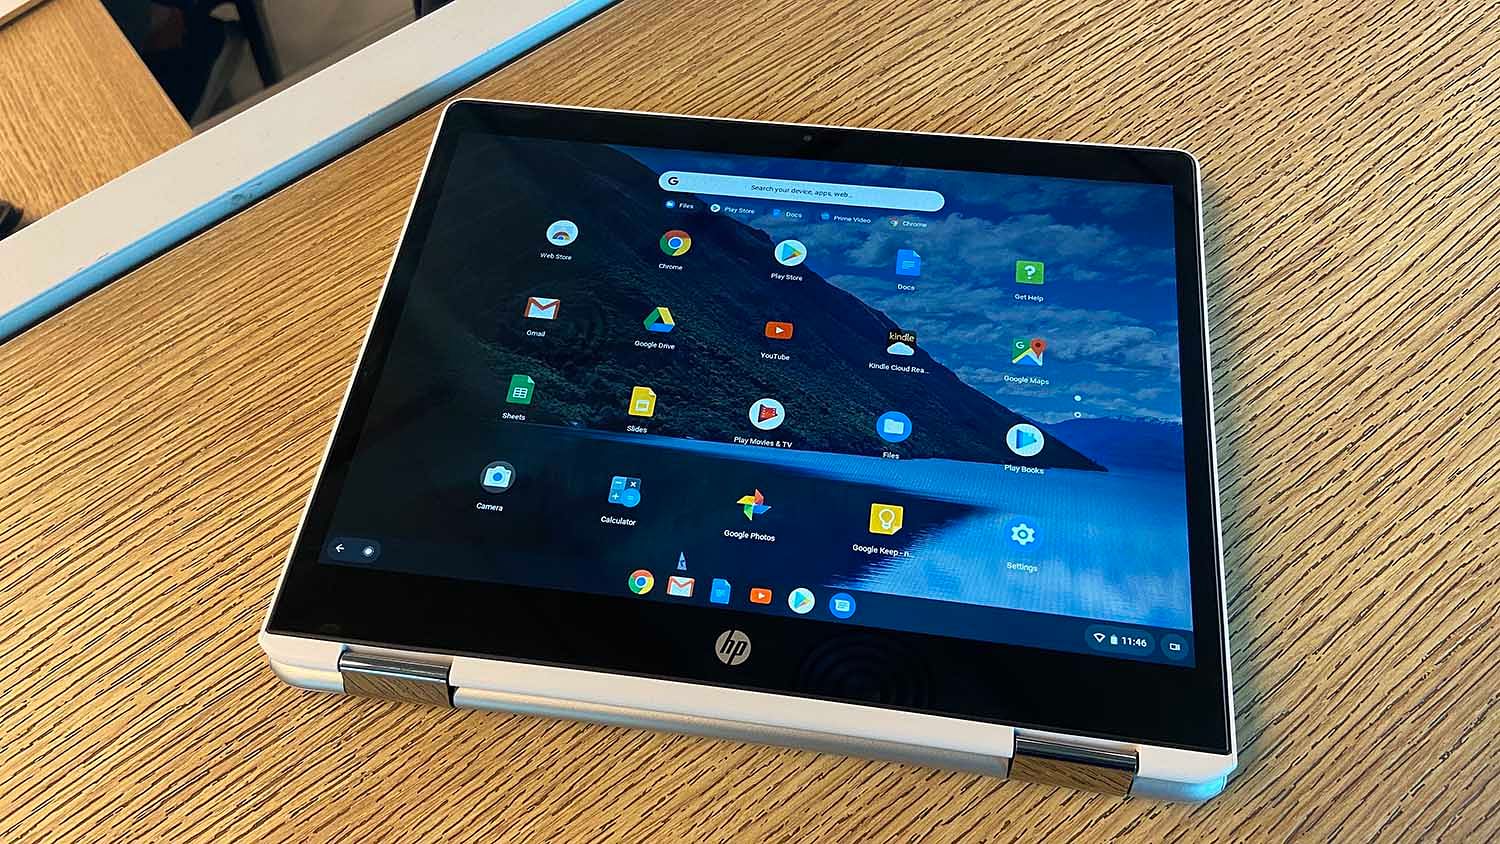 Google launched its first Chrome OS-based notebook back in 2013.